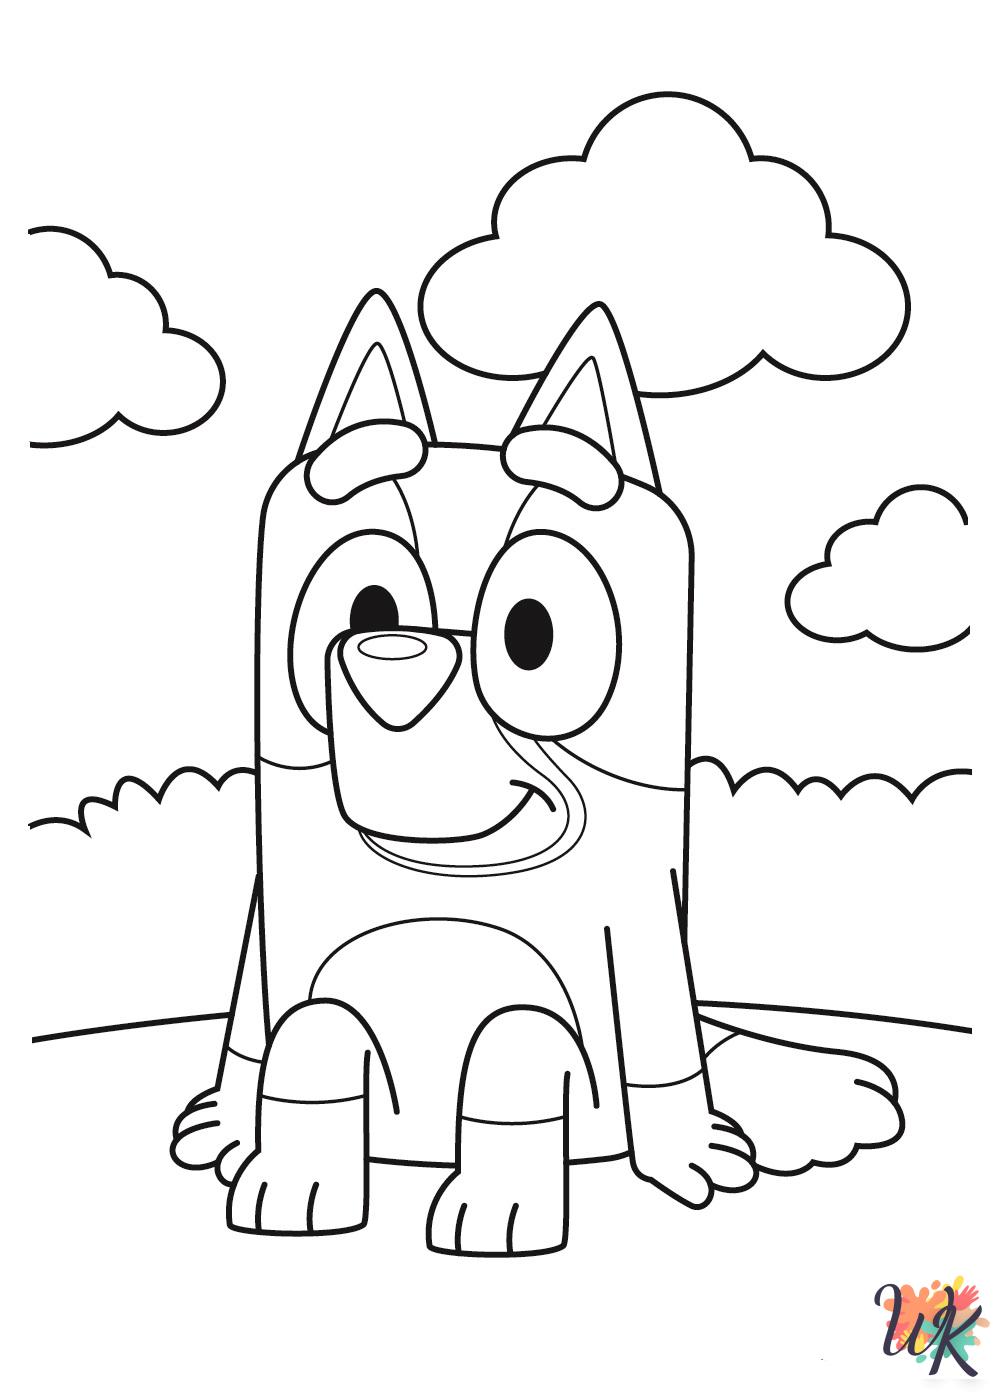 Bluey coloring pages for preschoolers